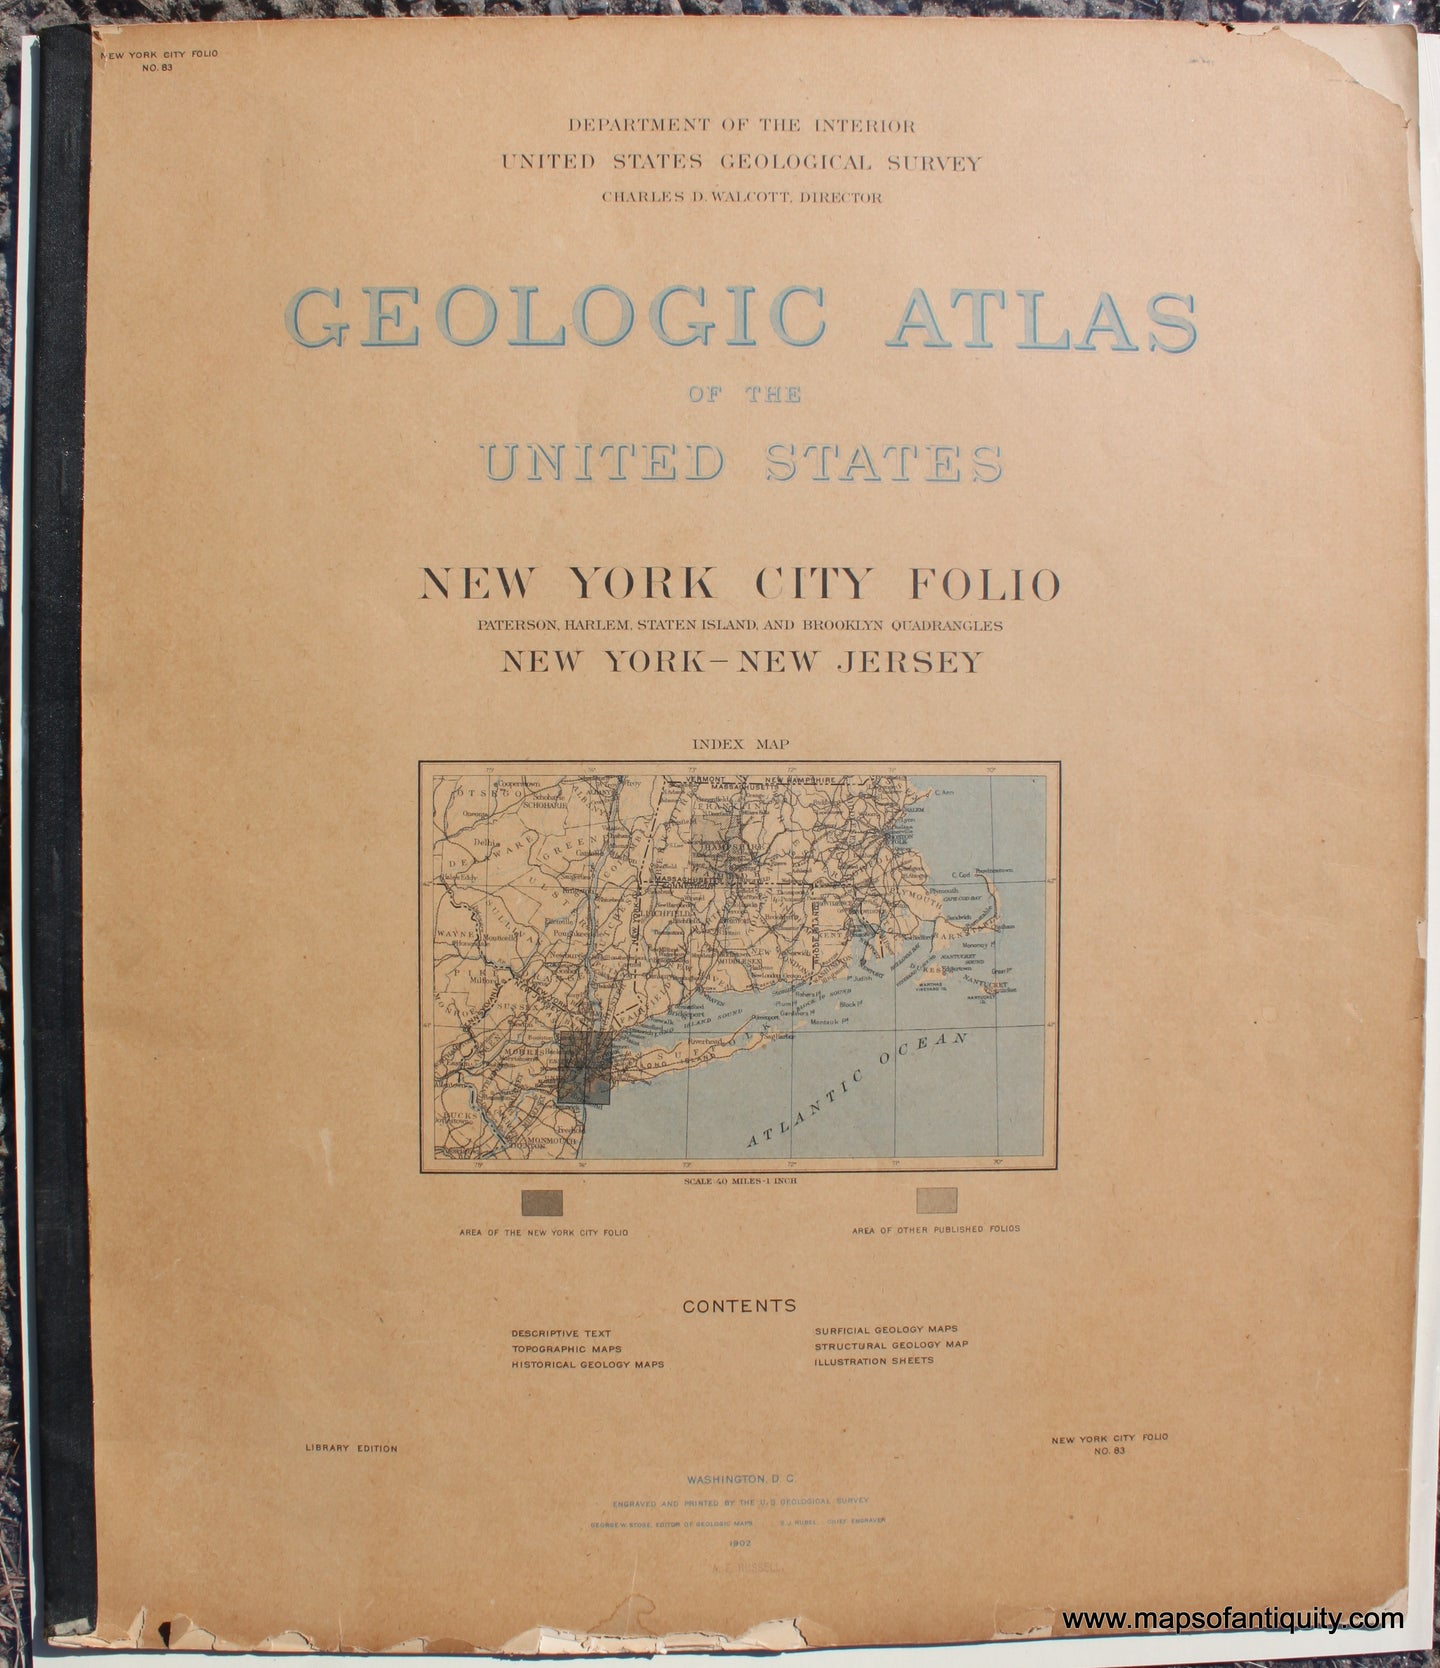 Genuine-Antique-Geologic-Atlas-Geological-Atlas-of-the-United-States-New-York-City-Folio-1902-US-Geological-Survey-Maps-Of-Antiquity-1800s-19th-century